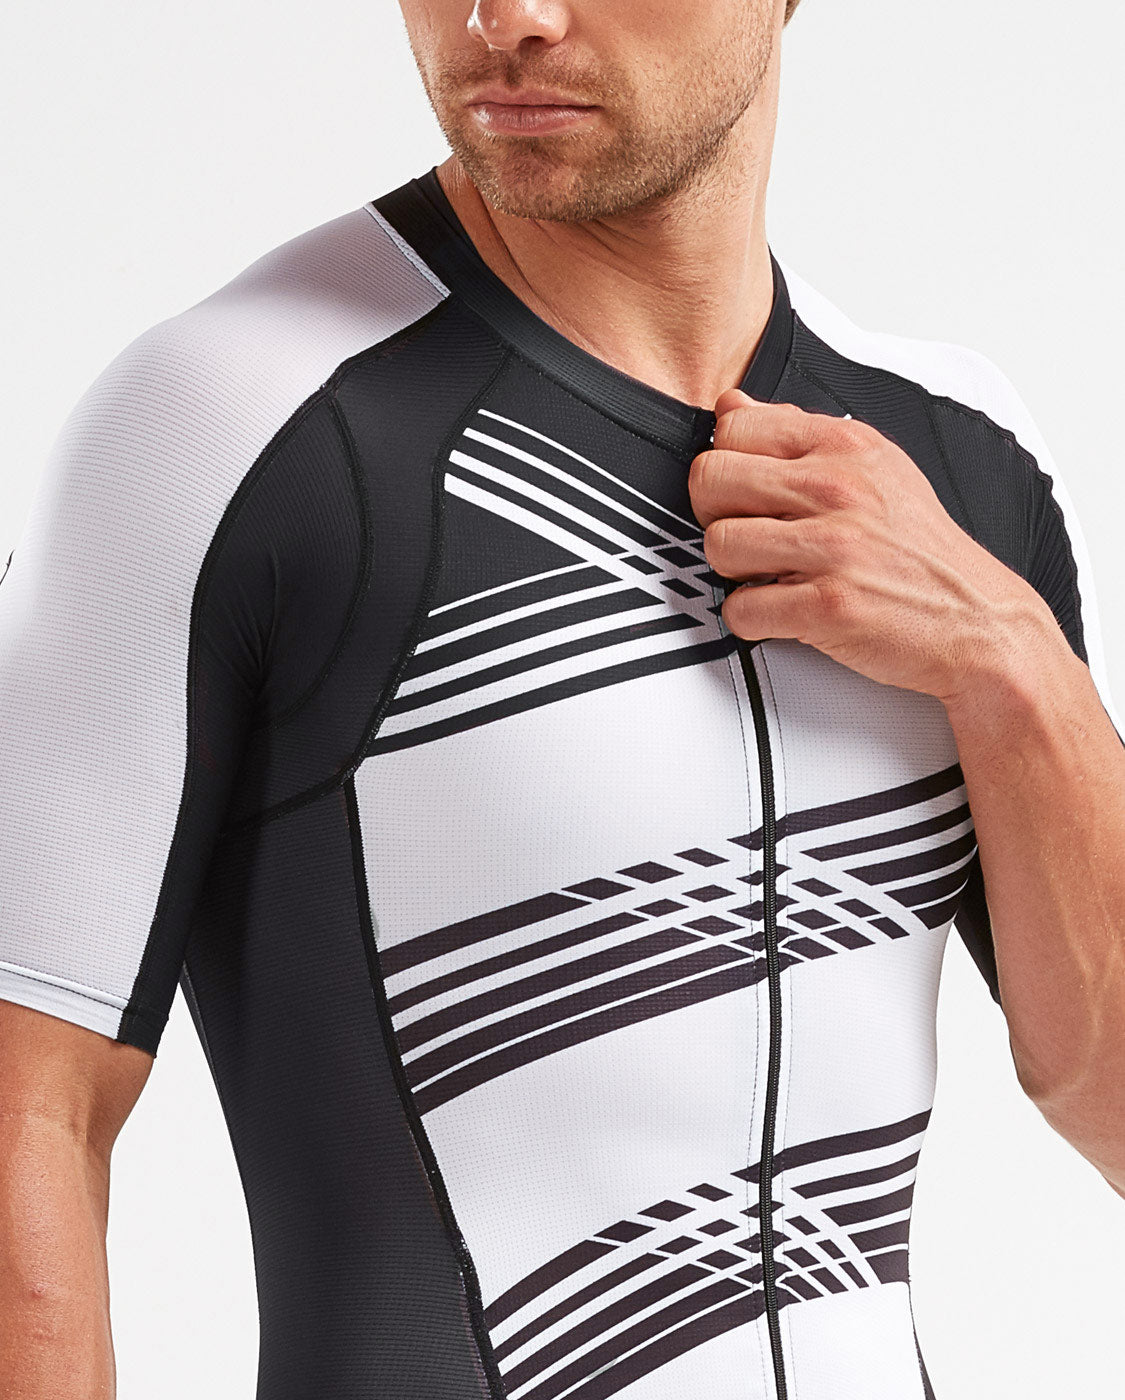 2XU South Africa - Men's Compression Full Zip Sleeved Trisuit - Black/White Lines